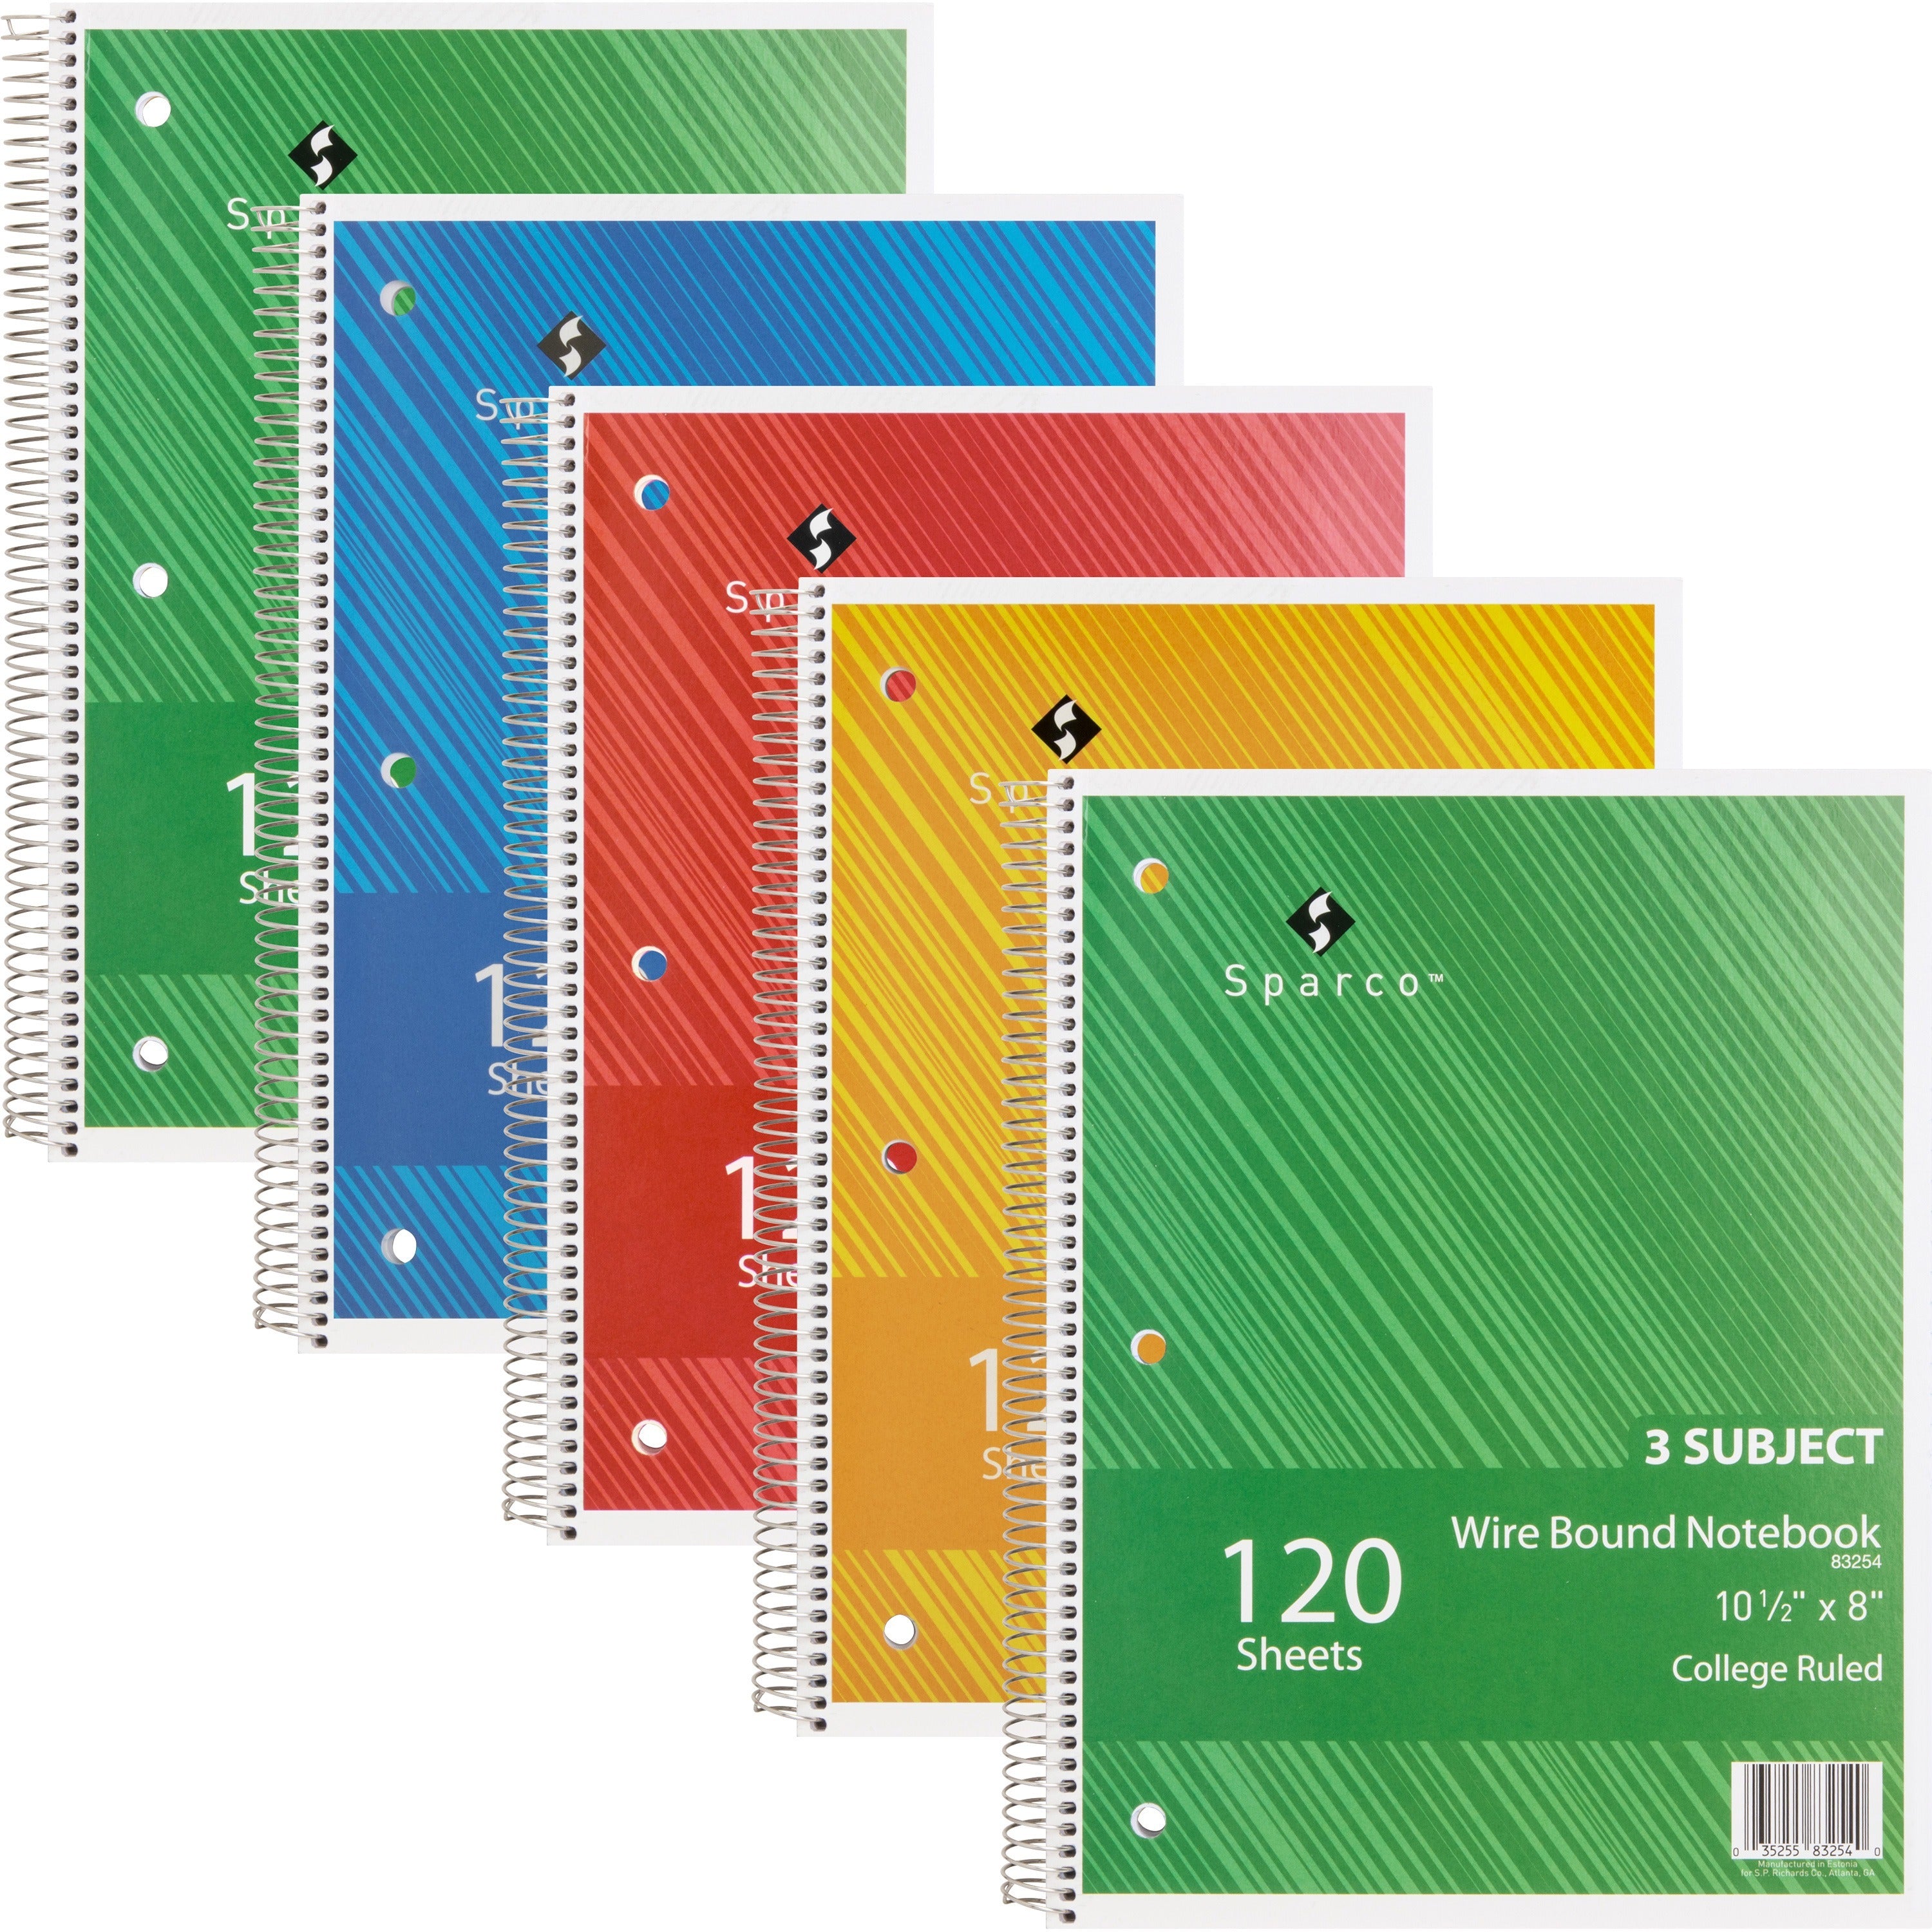 sparco-wire-bound-college-ruled-notebook-120-sheets-wire-bound-college-ruled-unruled-margin-16-lb-basis-weight-8-x-10-1-2-assorted-paper-assortedchipboard-cover-resist-bleed-through-subject-stiff-cover-stiff-back-6-bundle_spr83254bd - 1